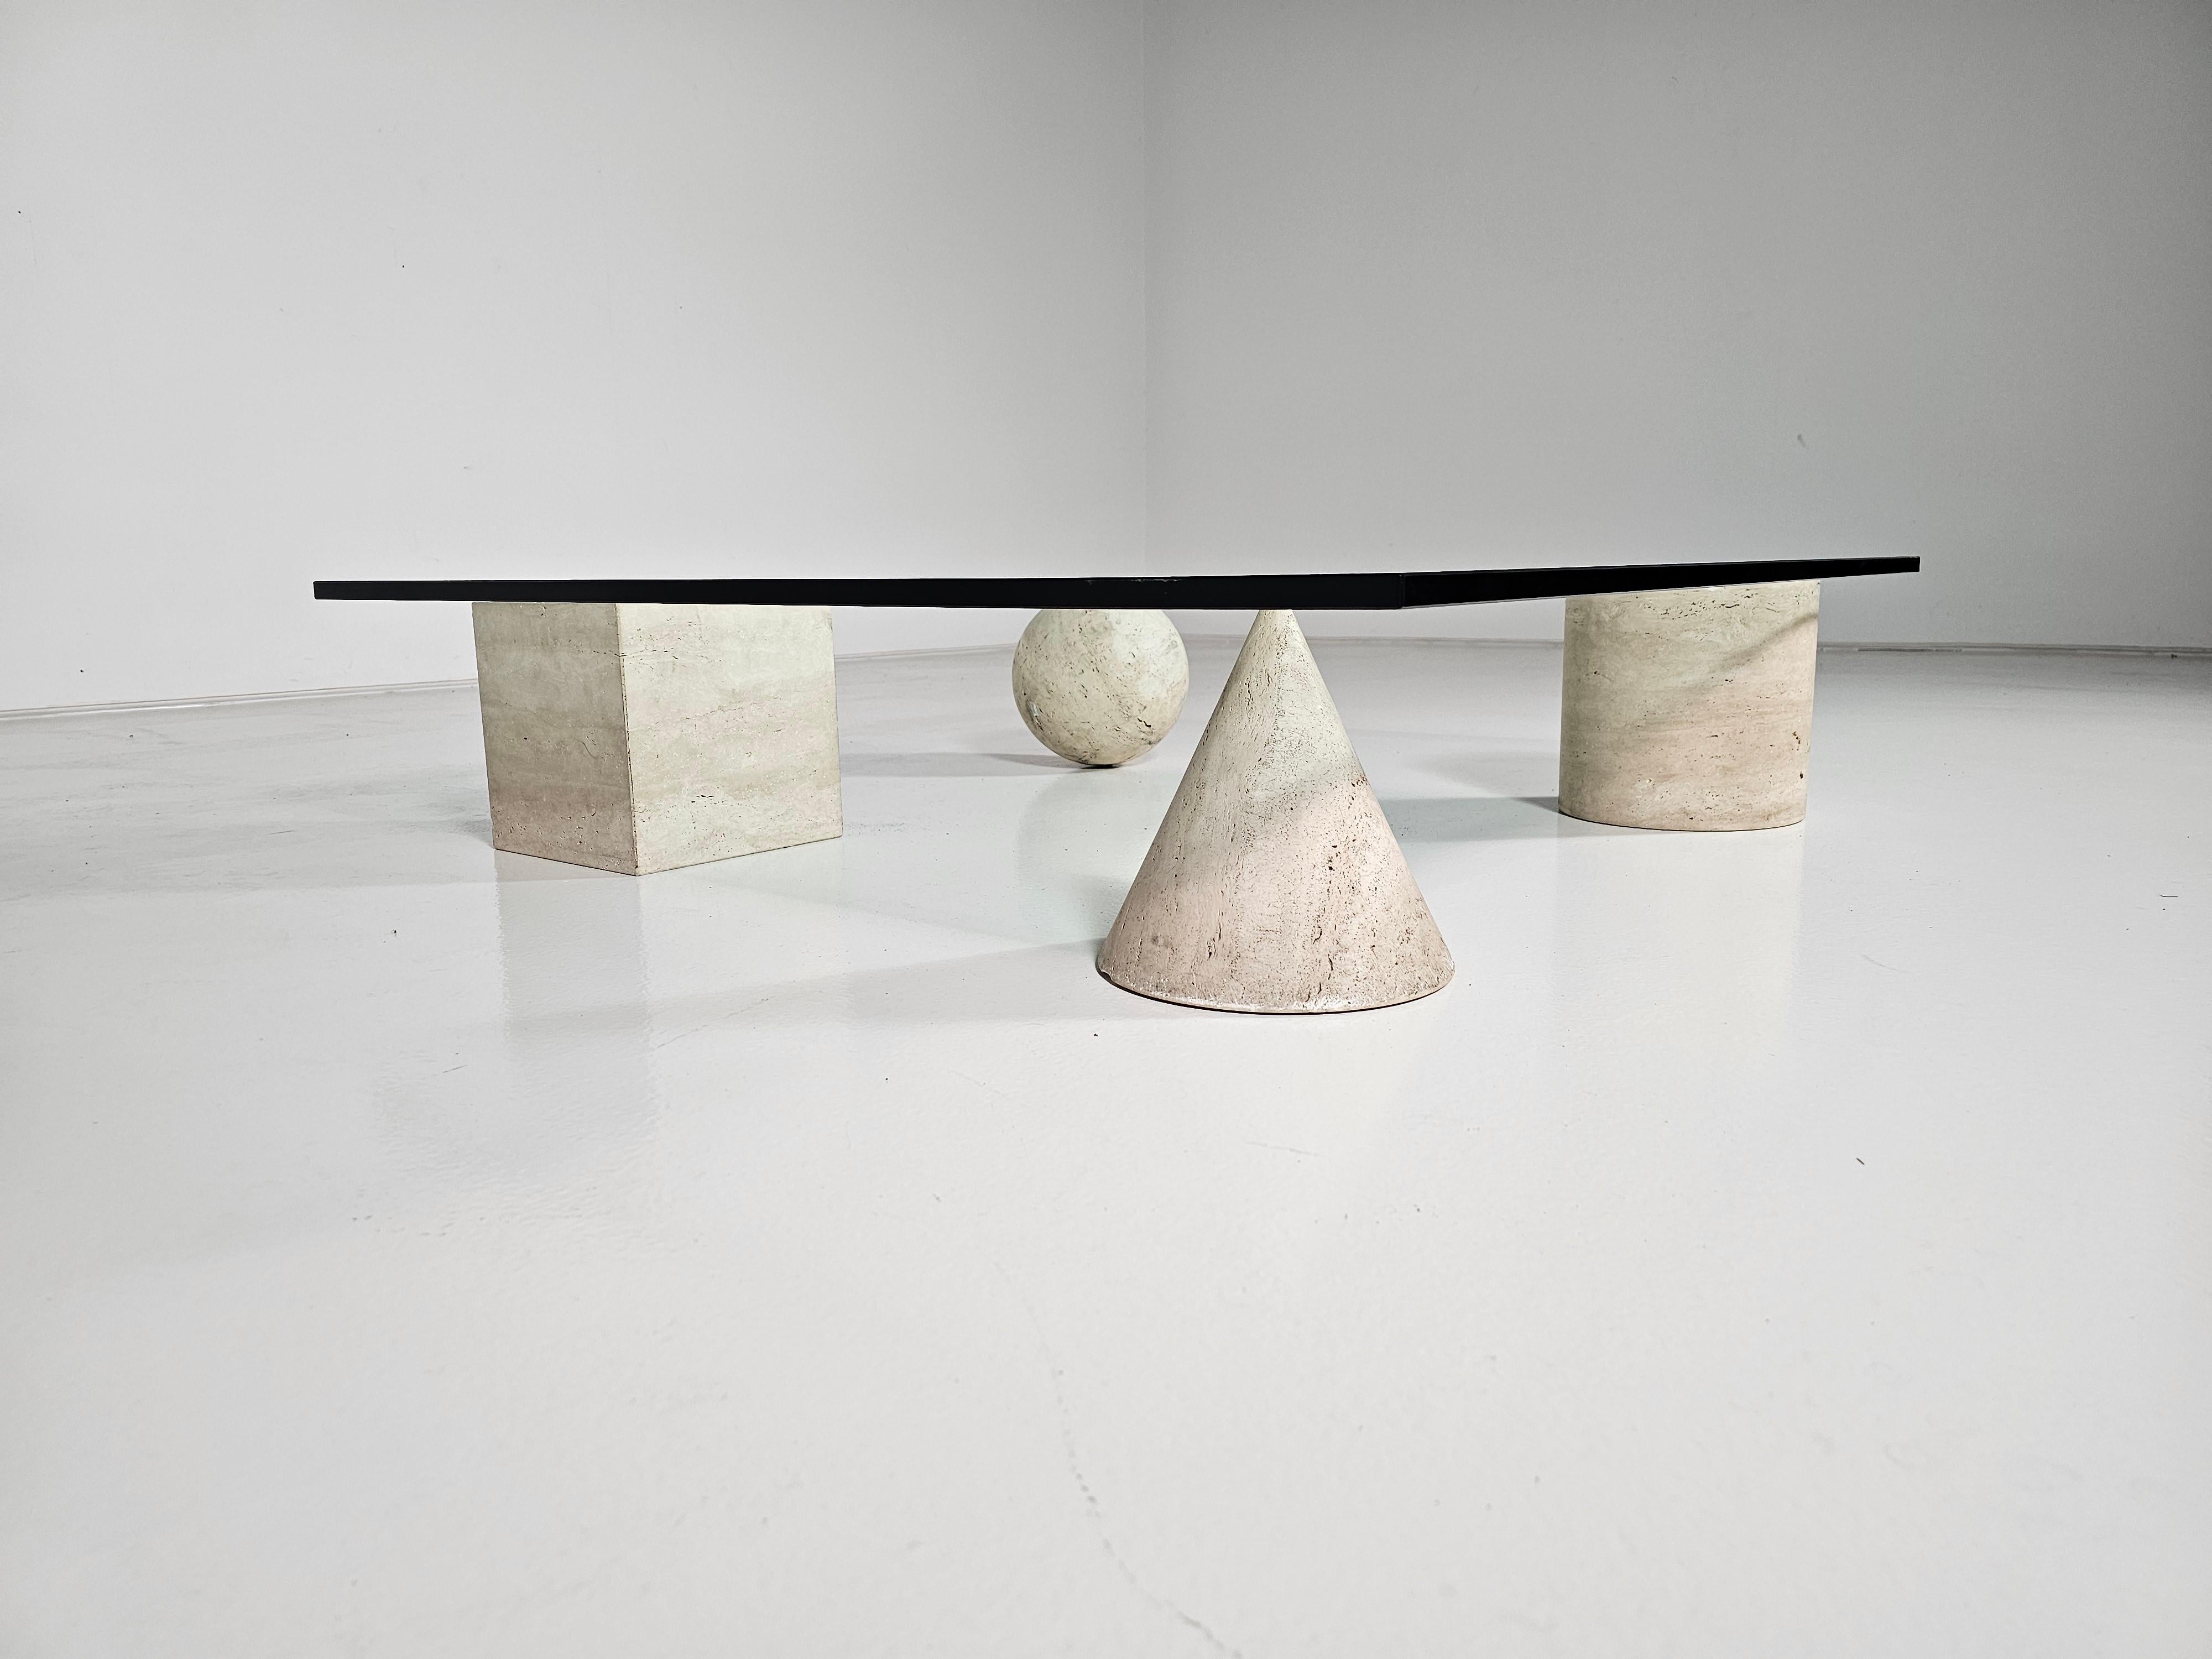 Sculptural Metafora travertine coffee table designed by Lella and Massimo Vignelli. in the 1970s. Inspired by the four forms of Euclidean geometry, the cube, the pyramid, the cylinder, and the sphere, the four elements can be positioned freely for a